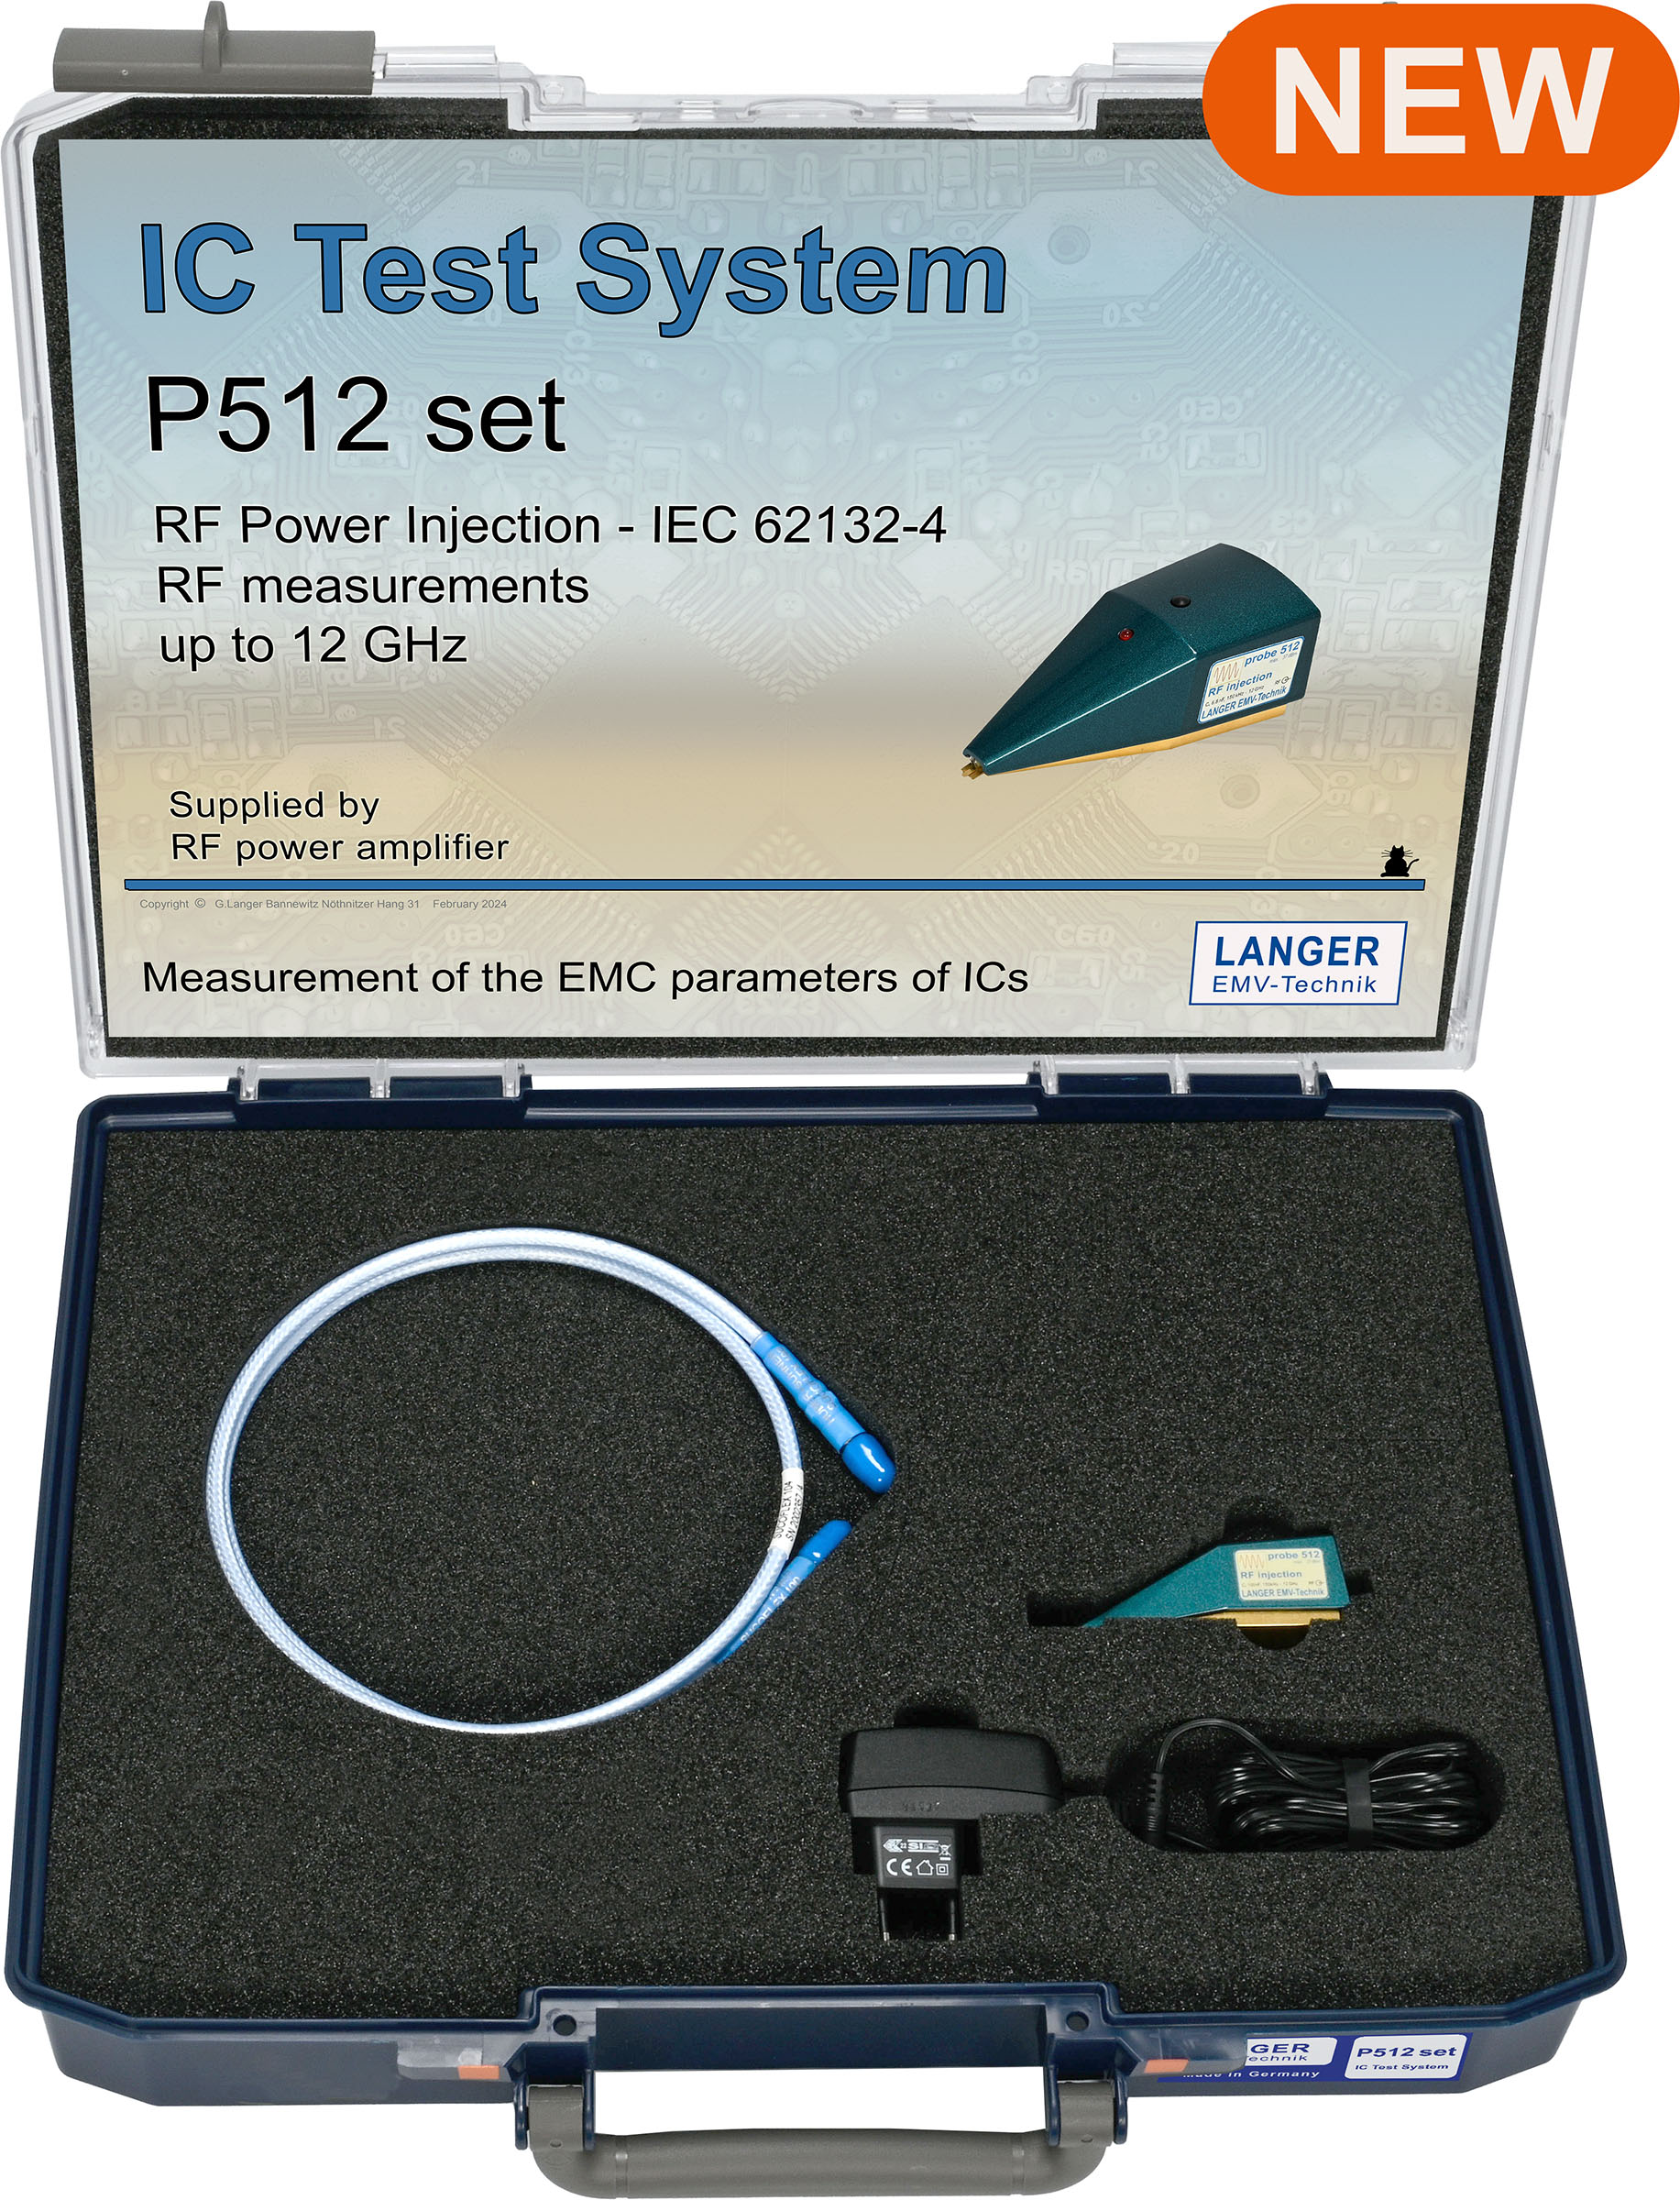 P512 set, RF Power Injection and Measurement IEC 62132-4 up to 12 GHz